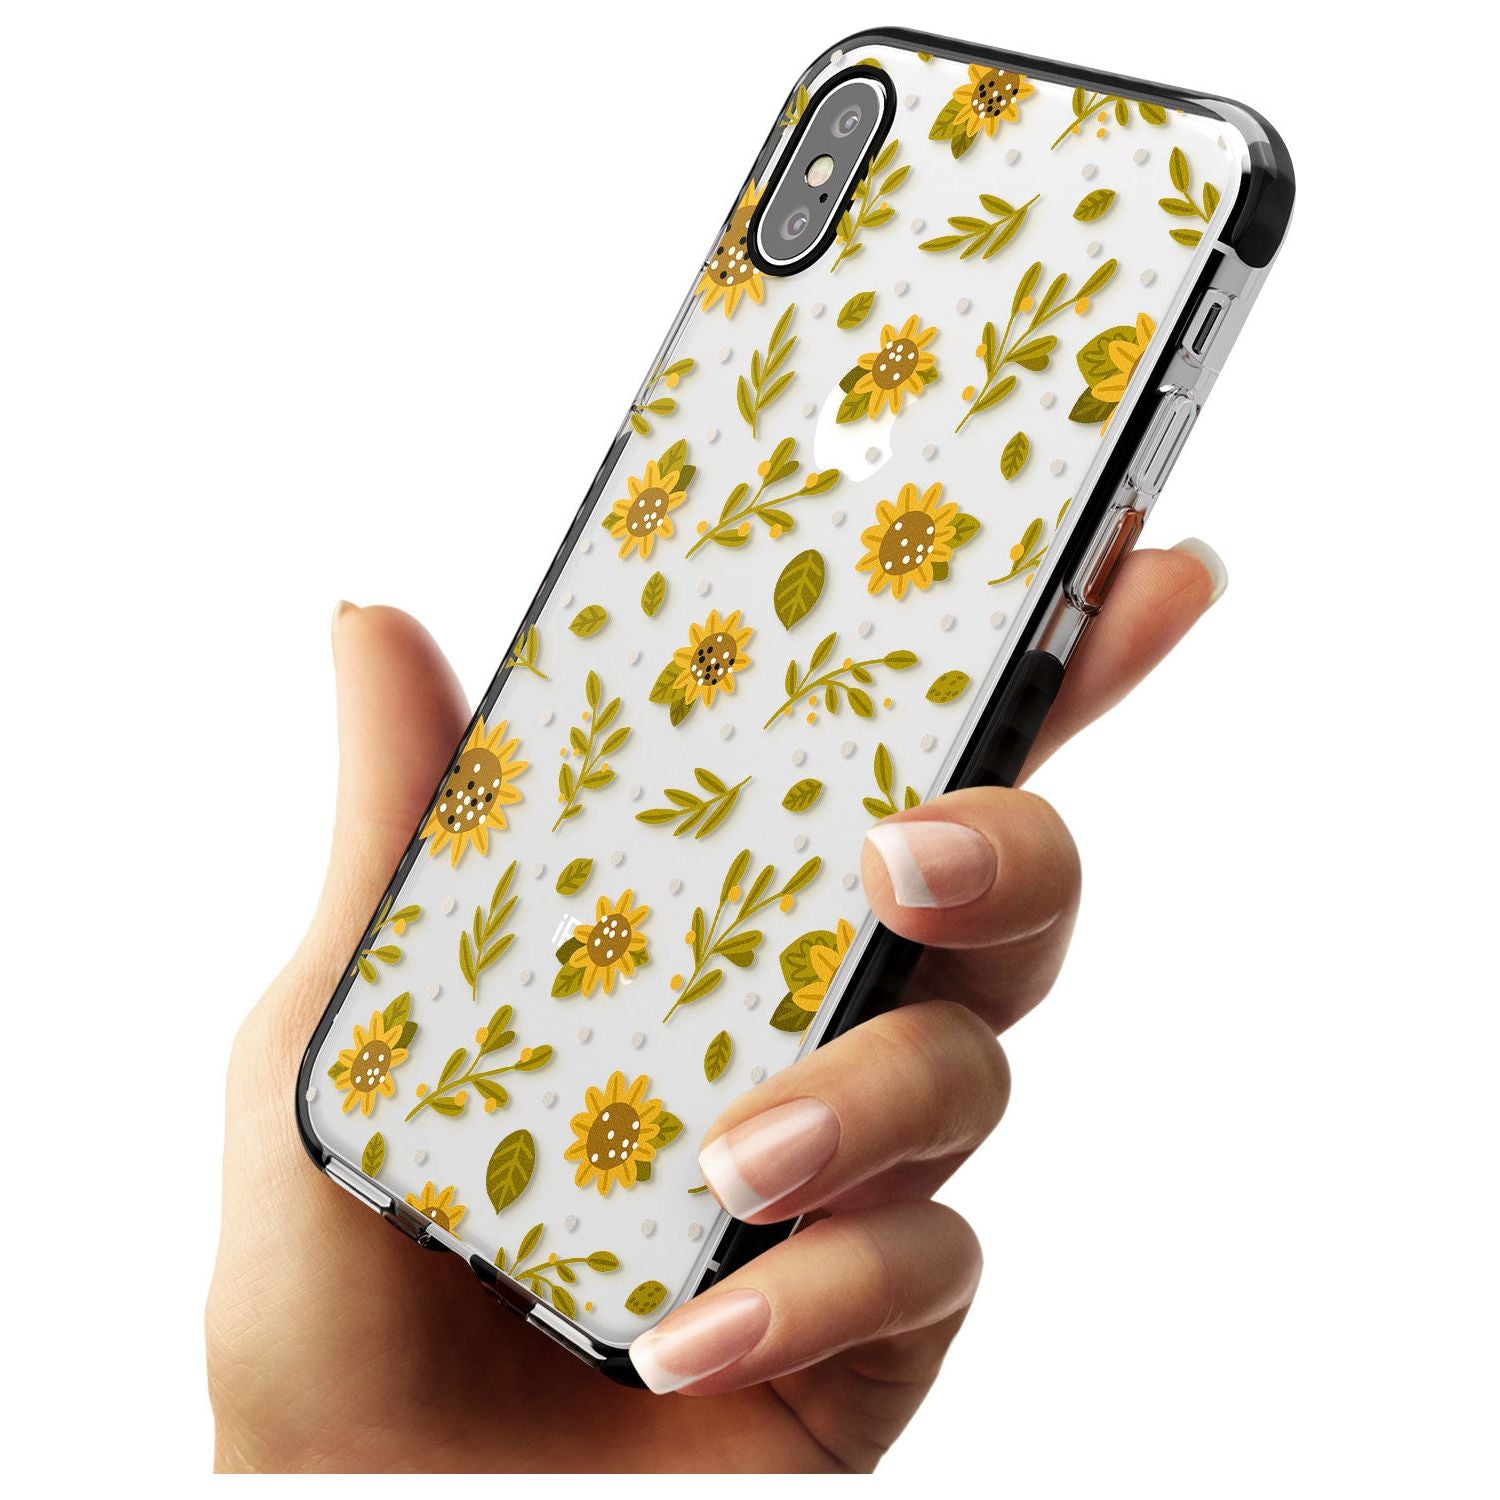 Sweet as Honey Patterns: Sunflowers (Clear) Black Impact Phone Case for iPhone X XS Max XR